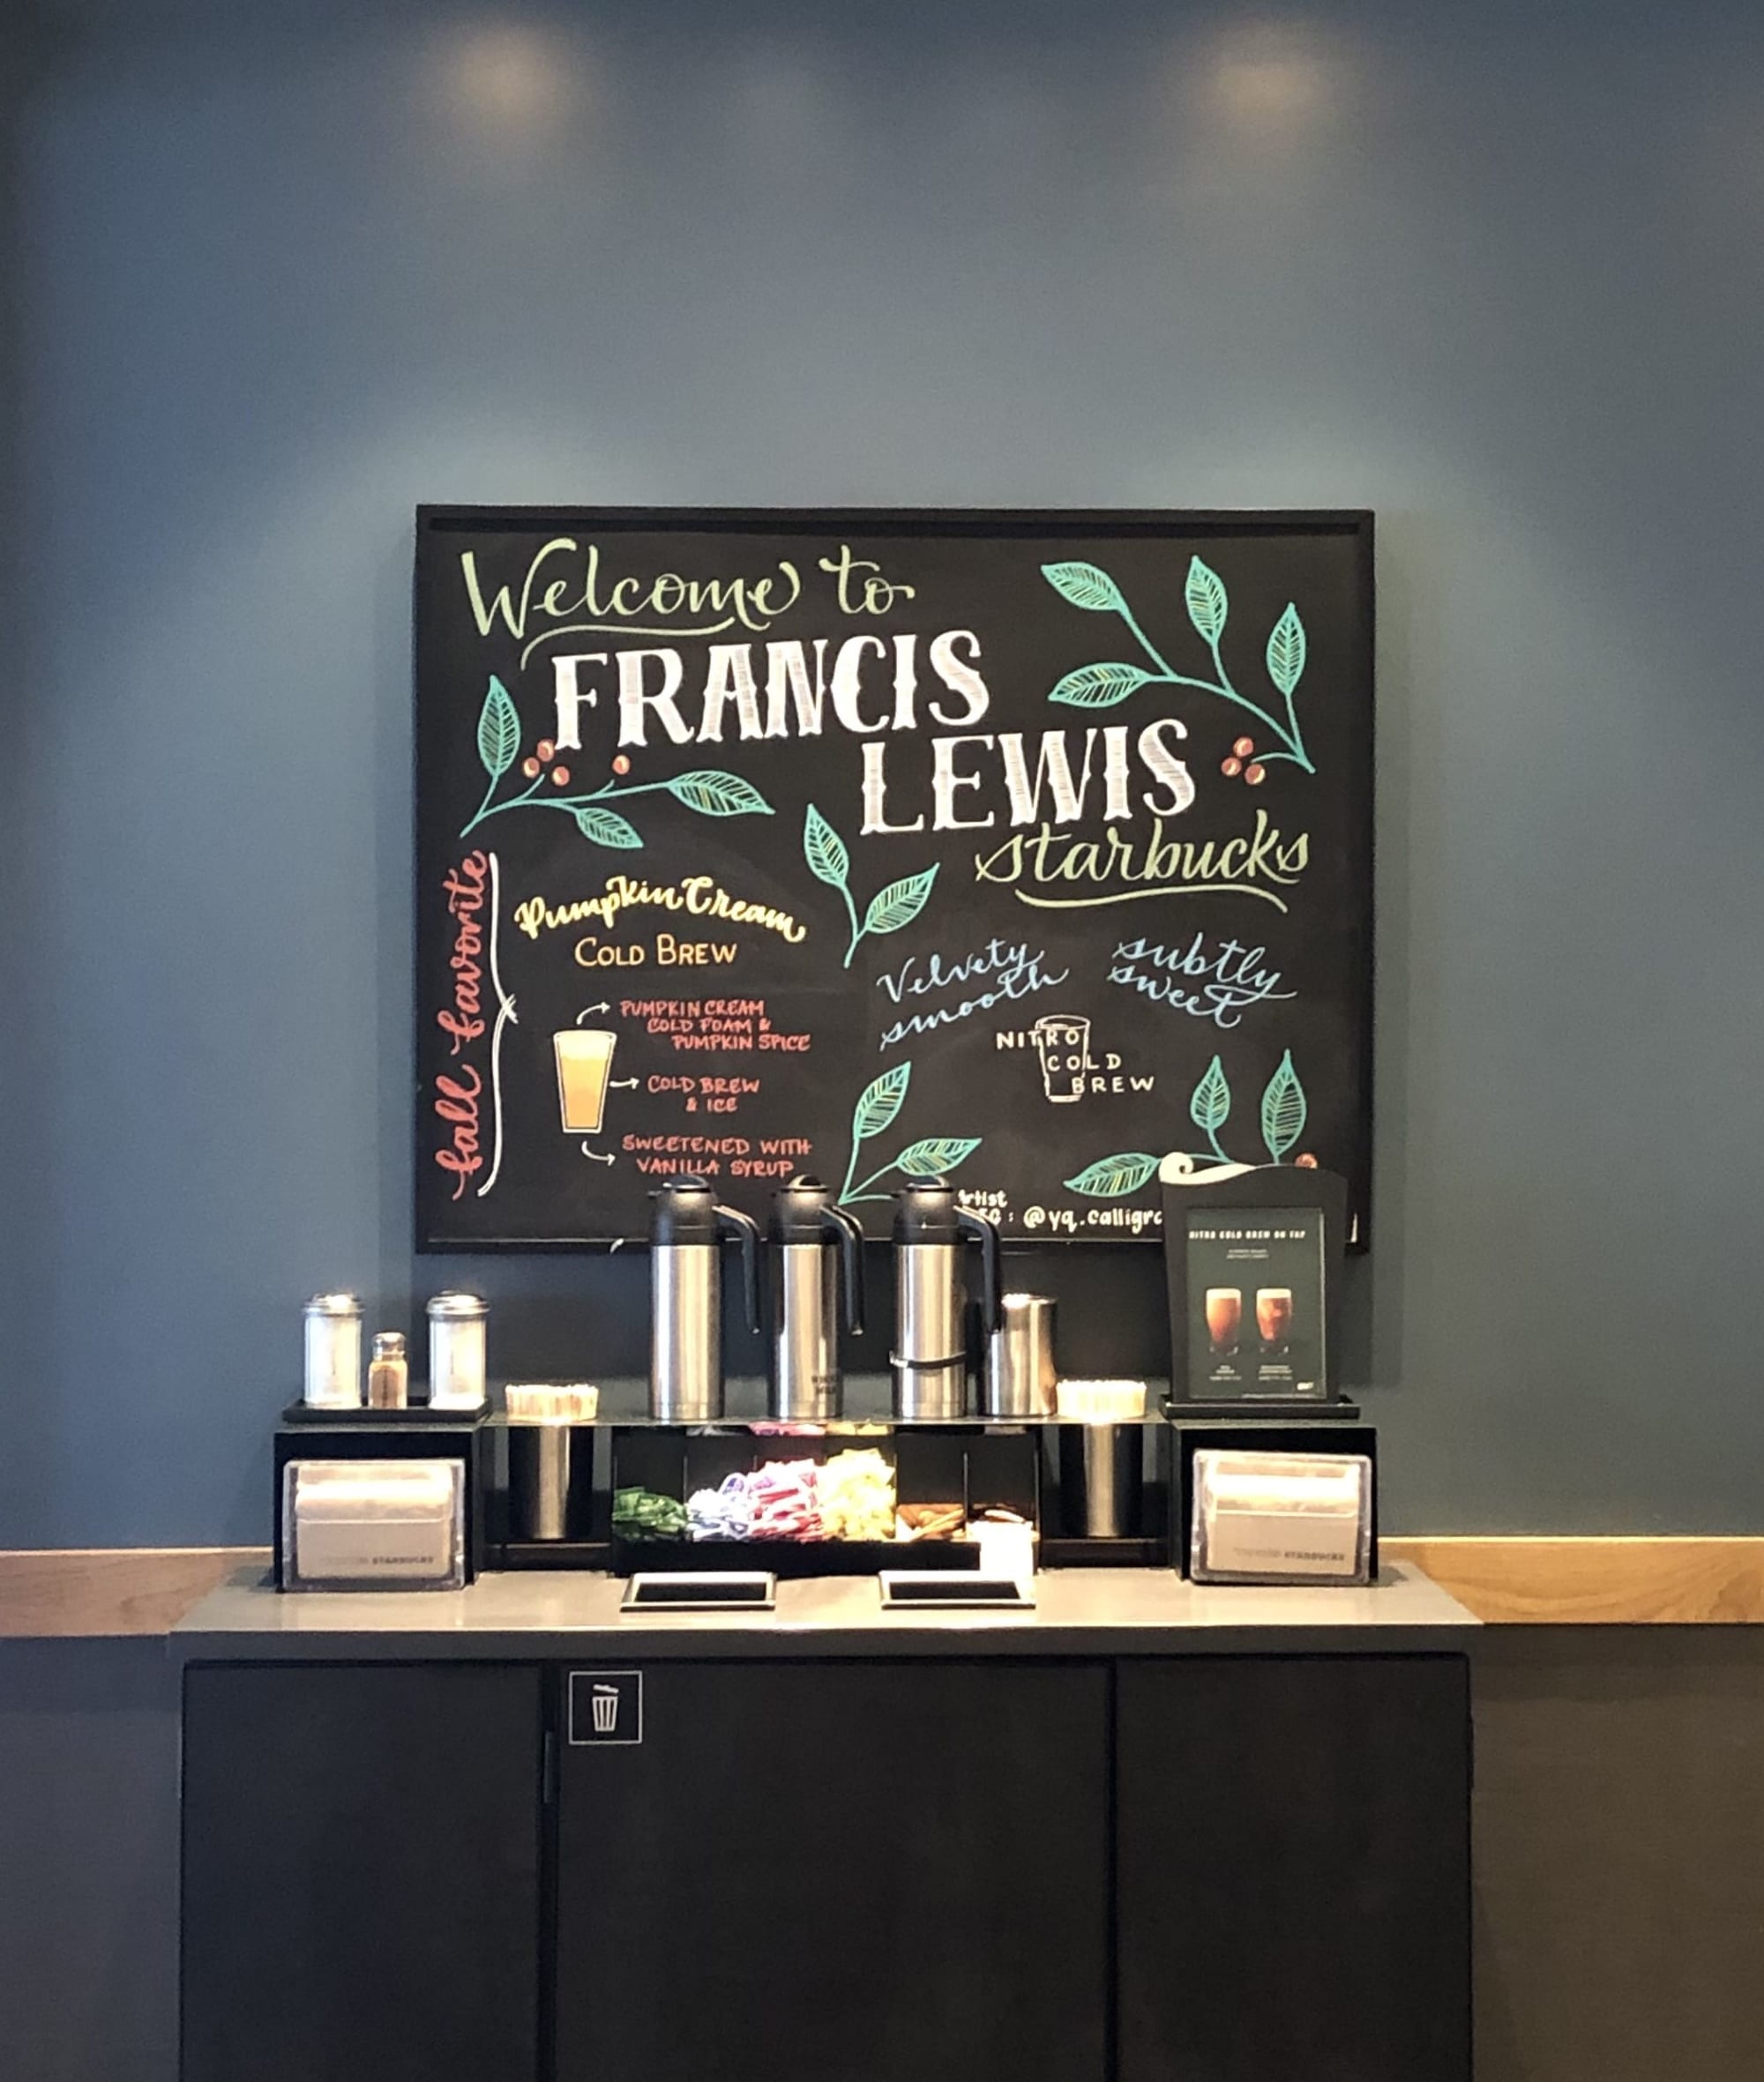 Chalkboard Art By Yq Design Seen At Starbucks Queens Wescover